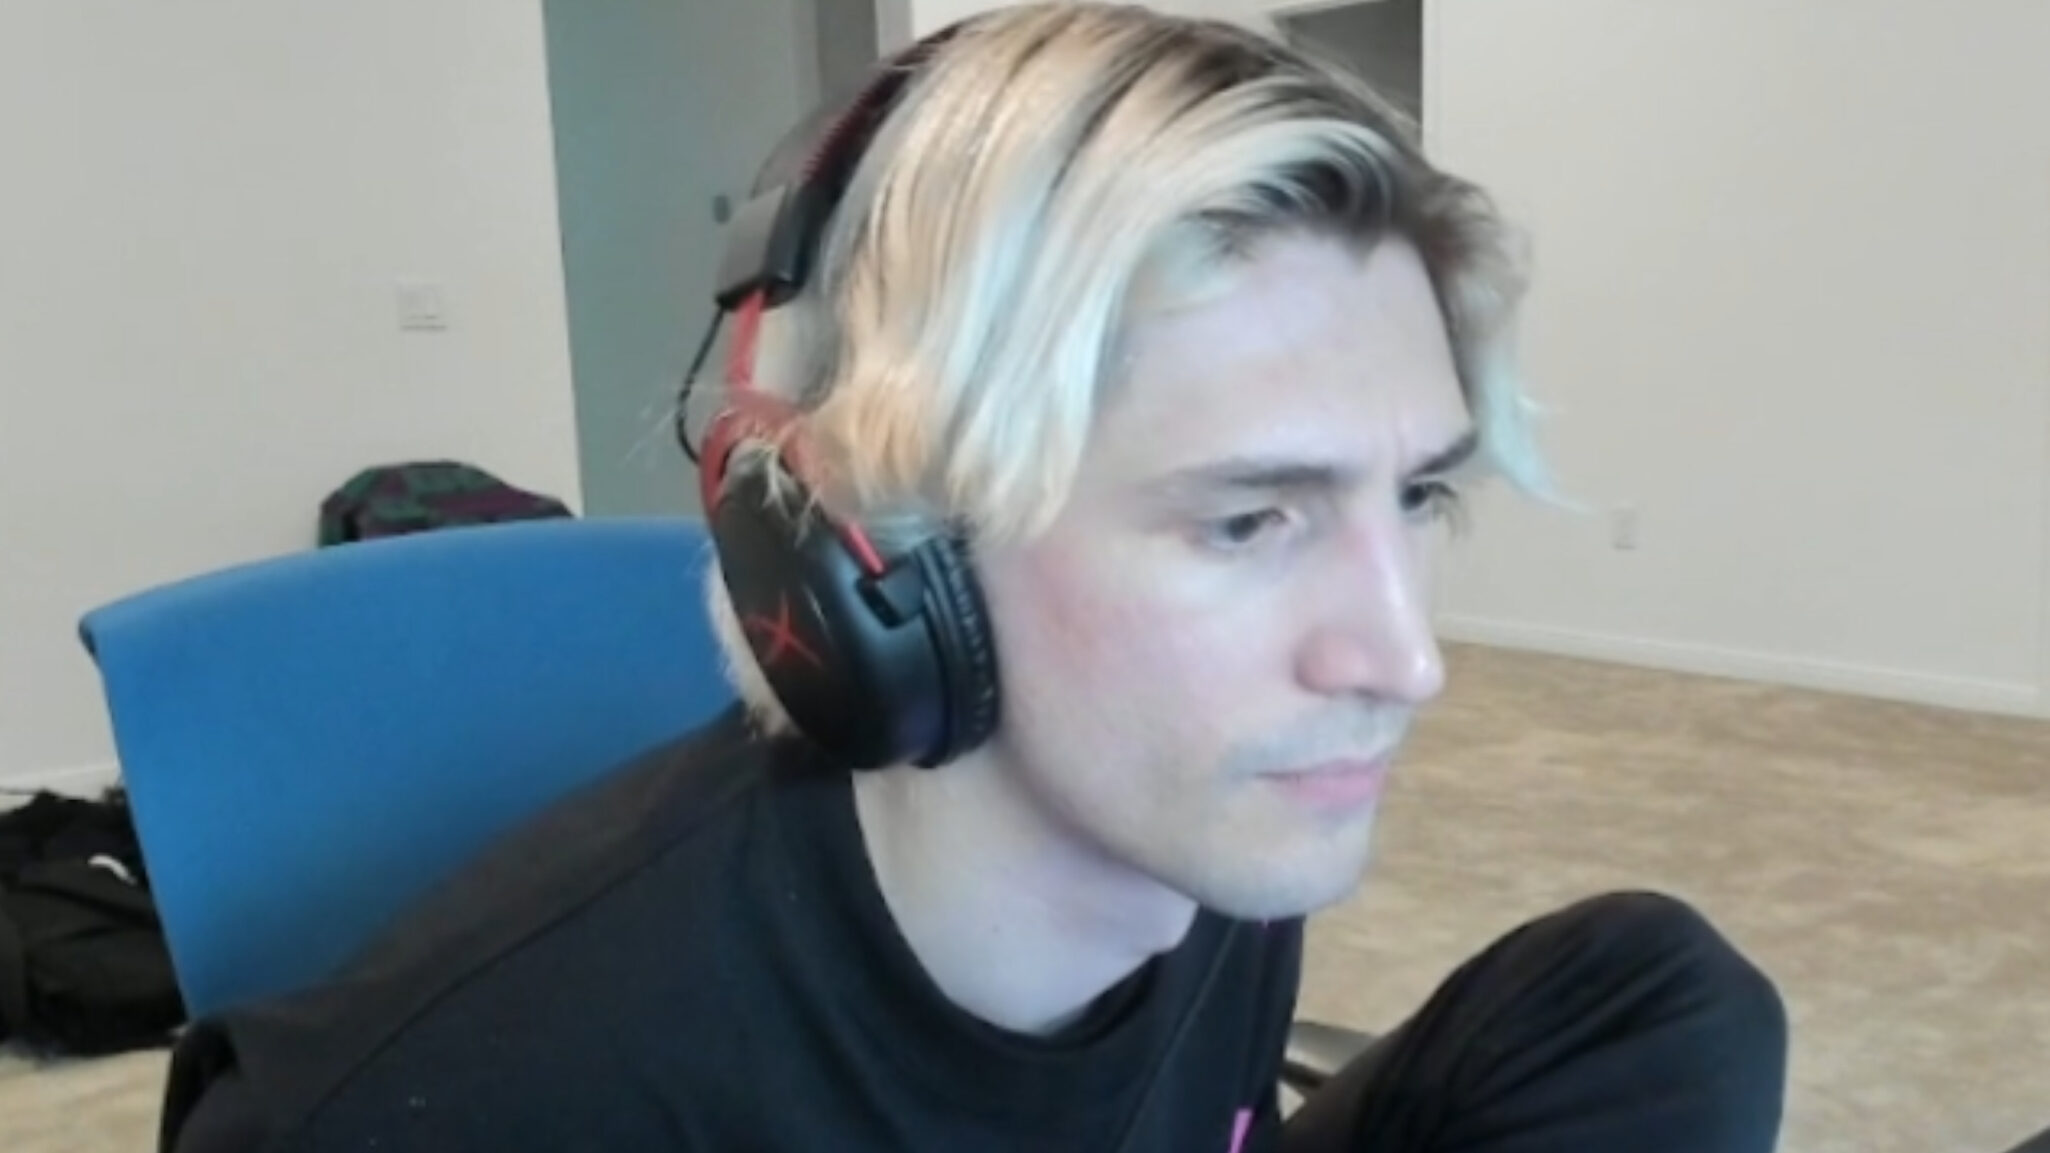 Twitch Star xQc Signs $100 Million Deal With Kick, a Rival